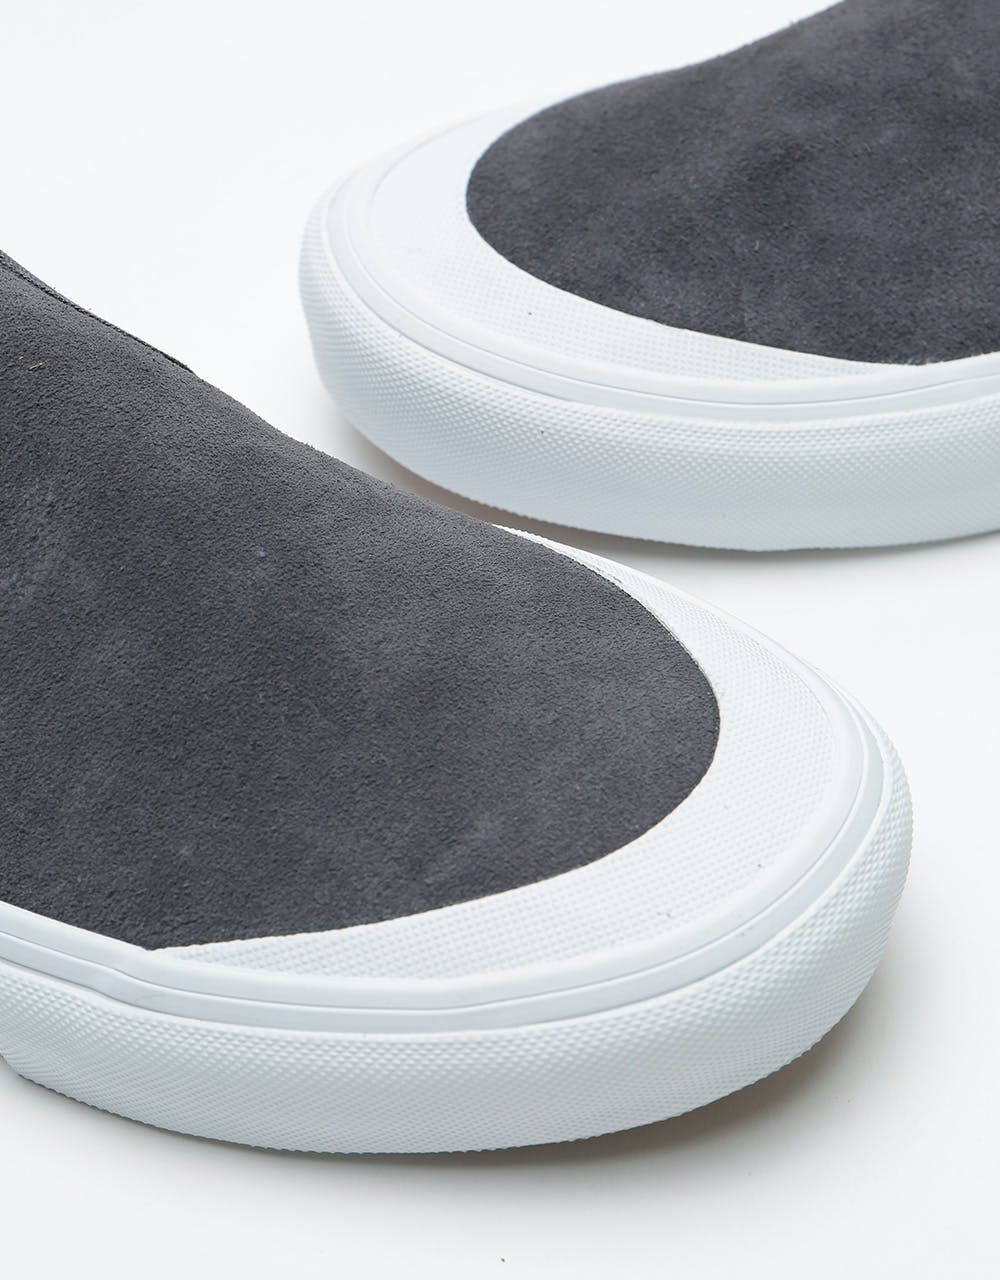 Vans Slip-On Pro Skate Shoes - Periscope/Drizzle